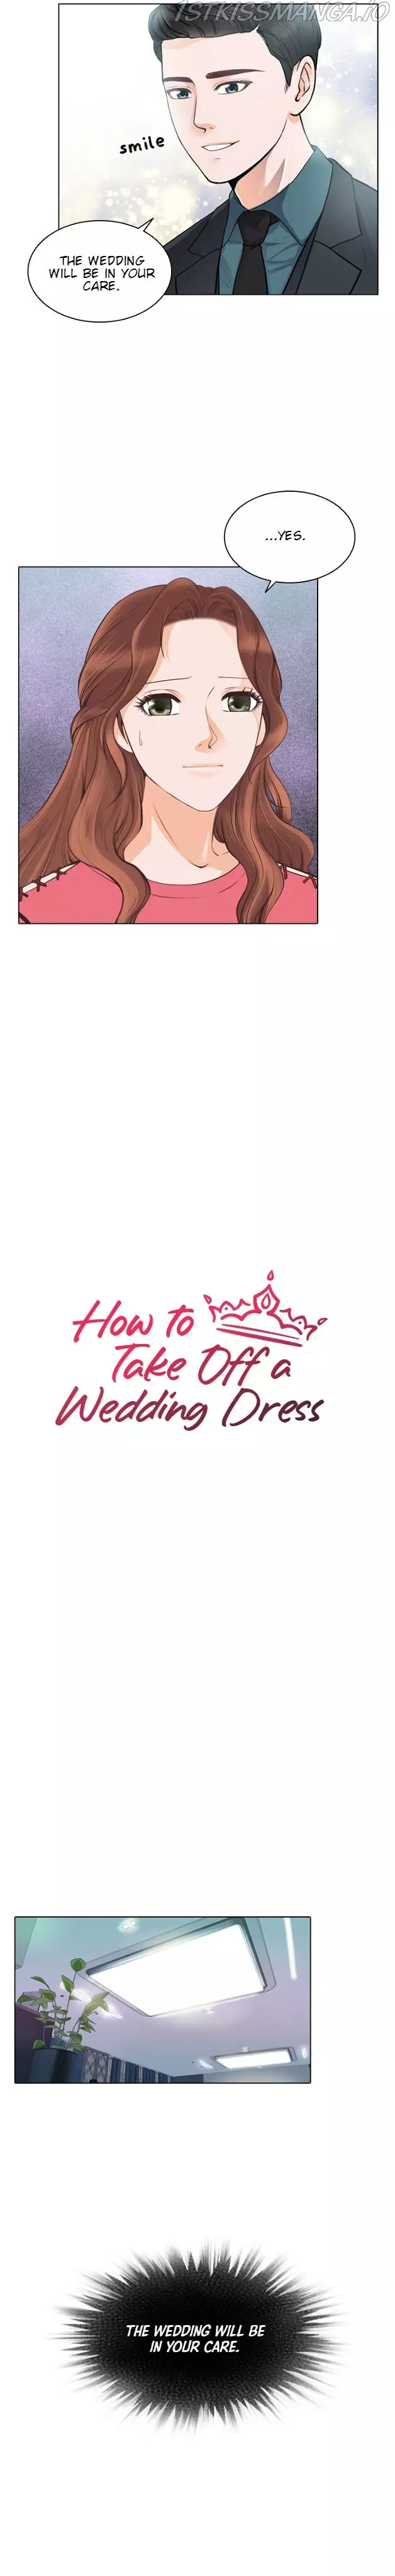 How To Take Off A Wedding Dress - 7 page 4